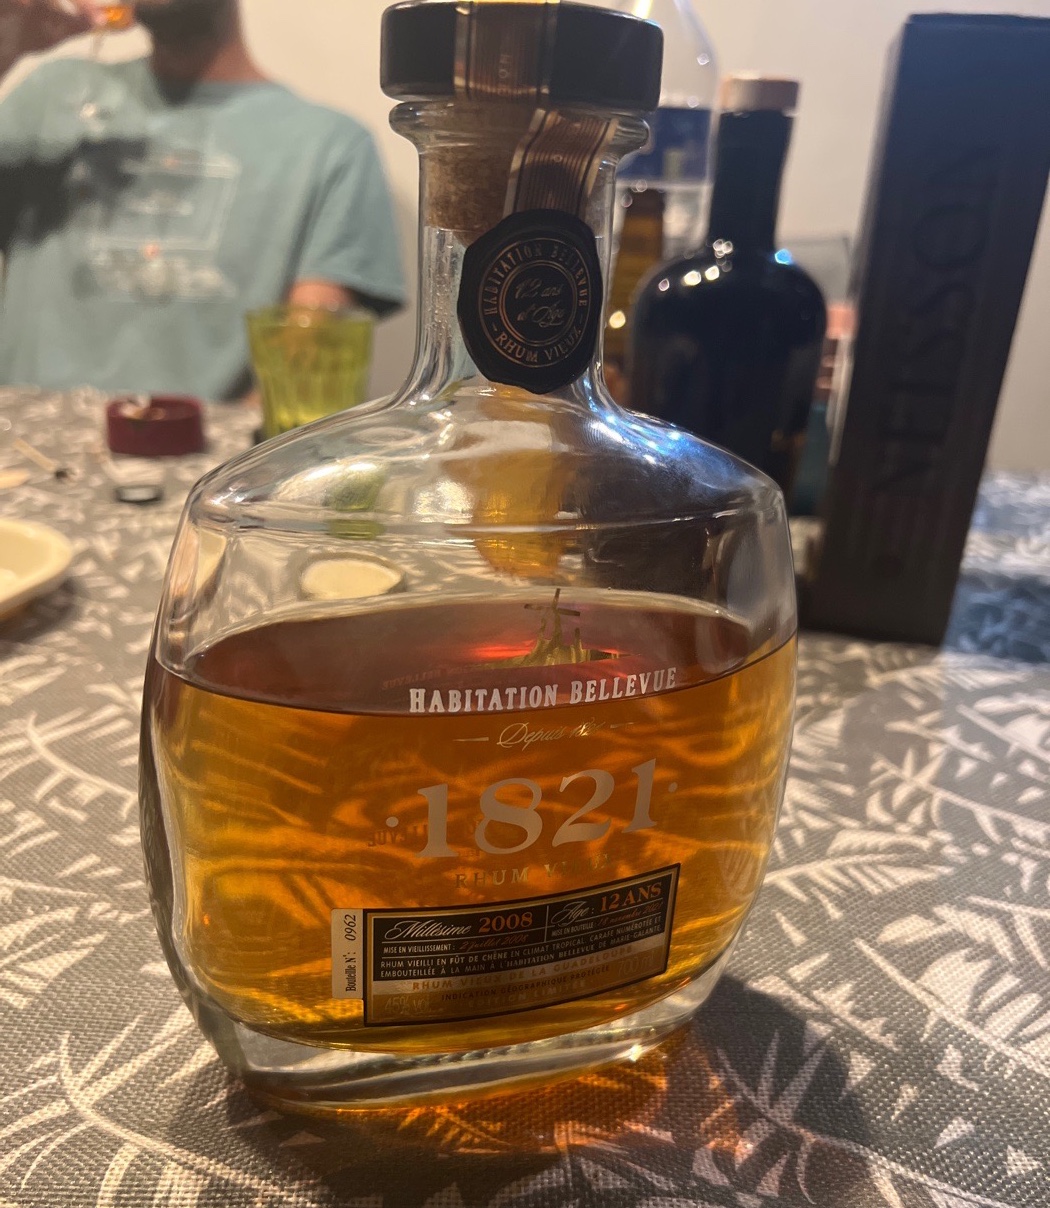 Photo of the bottle taken from user Steevy Montout